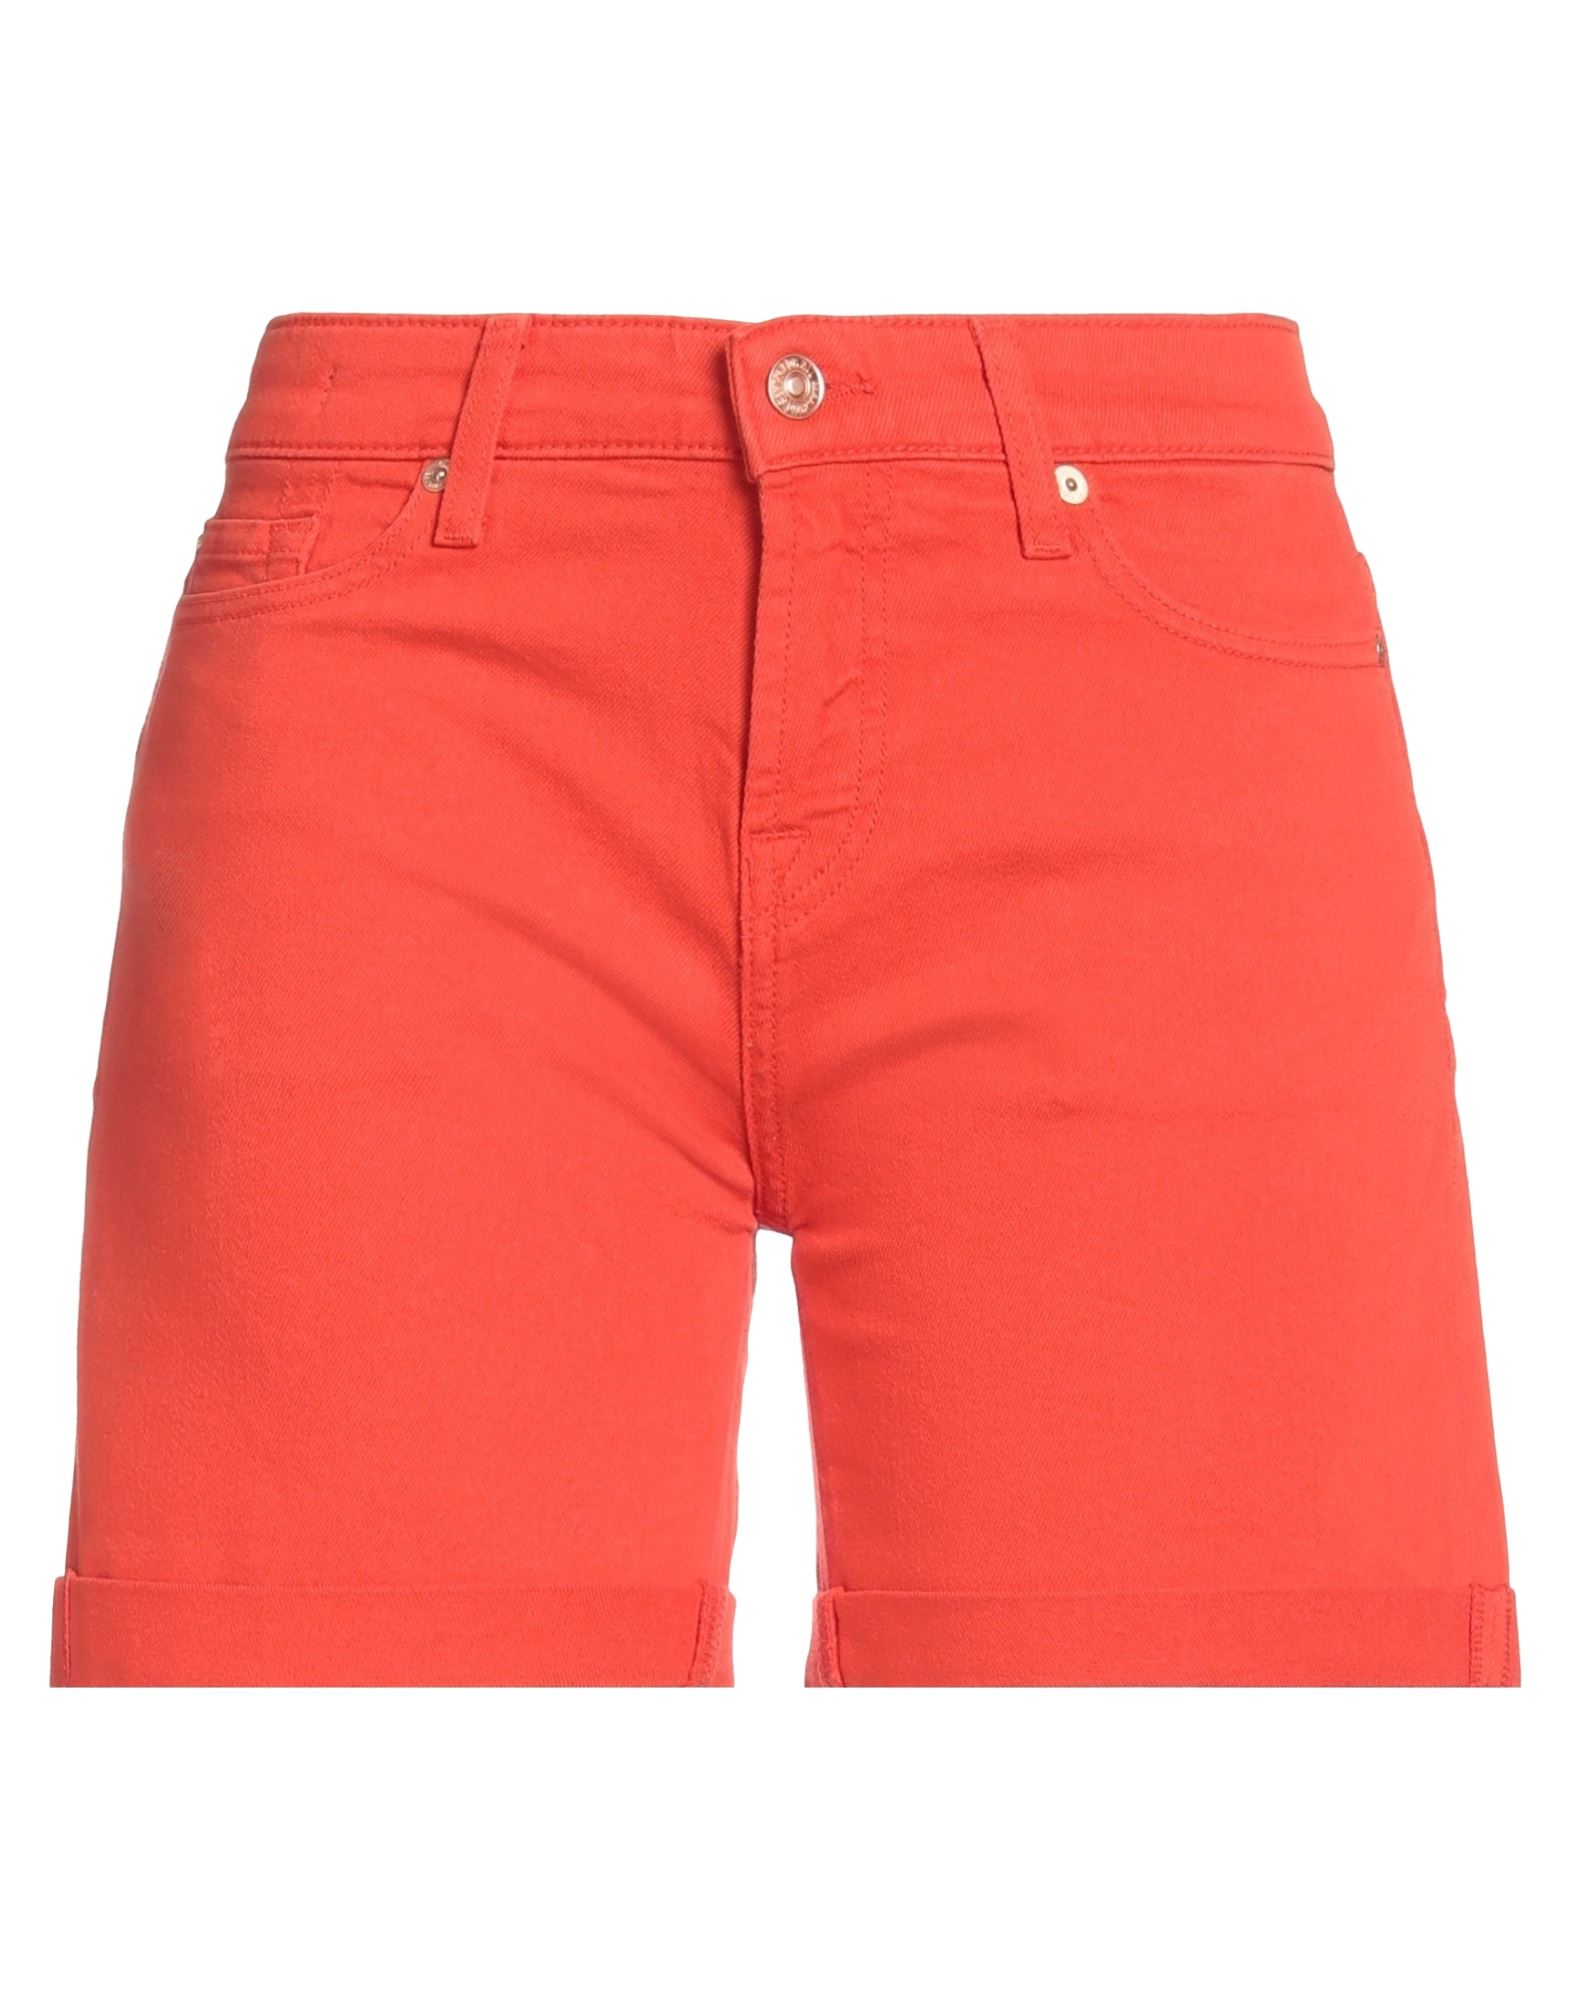 7 FOR ALL MANKIND Jeansshorts Damen Rot von 7 FOR ALL MANKIND